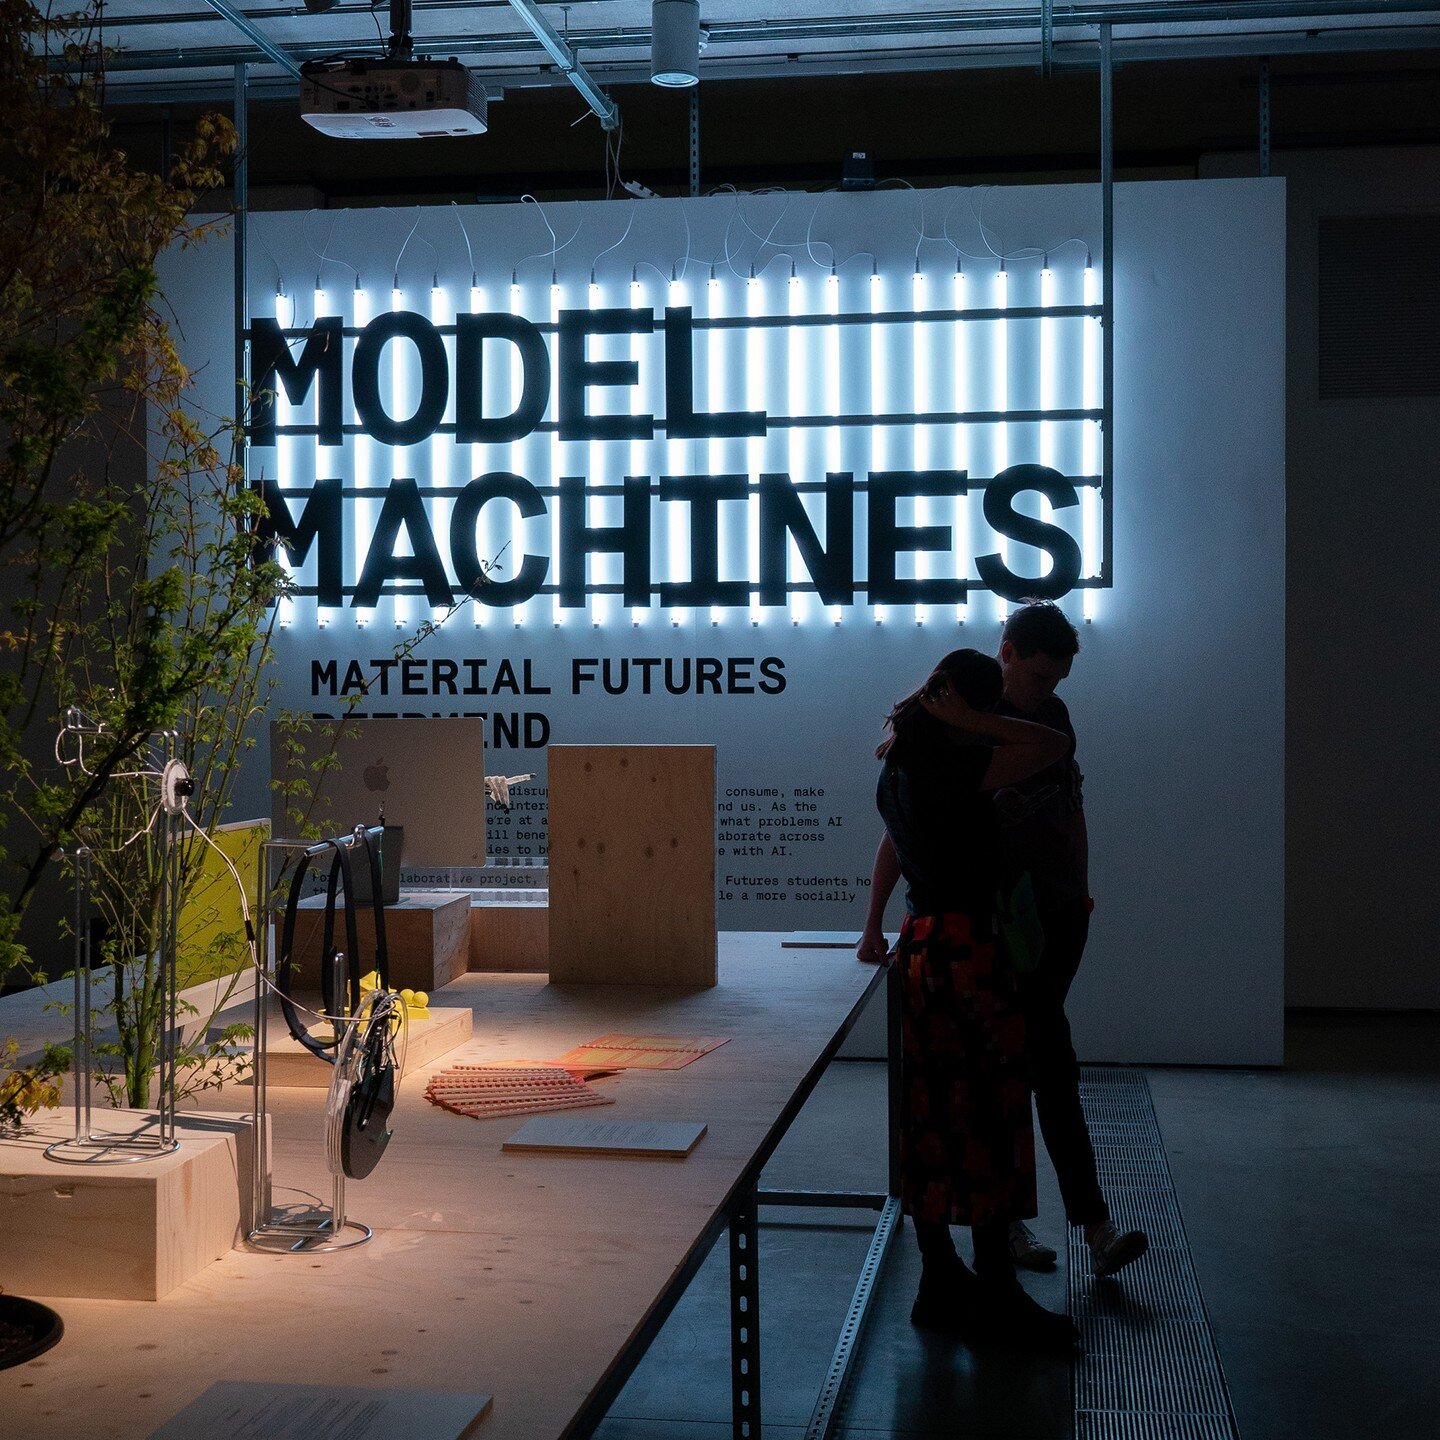 MODEL MACHINES is on at the @lethabygallery 💥

Artificial Intelligence is disrupting the way we learn, consume, make decisions, do our jobs and interact with the world around us. As the technology progresses, we&rsquo;re at a pivotal moment to ask w